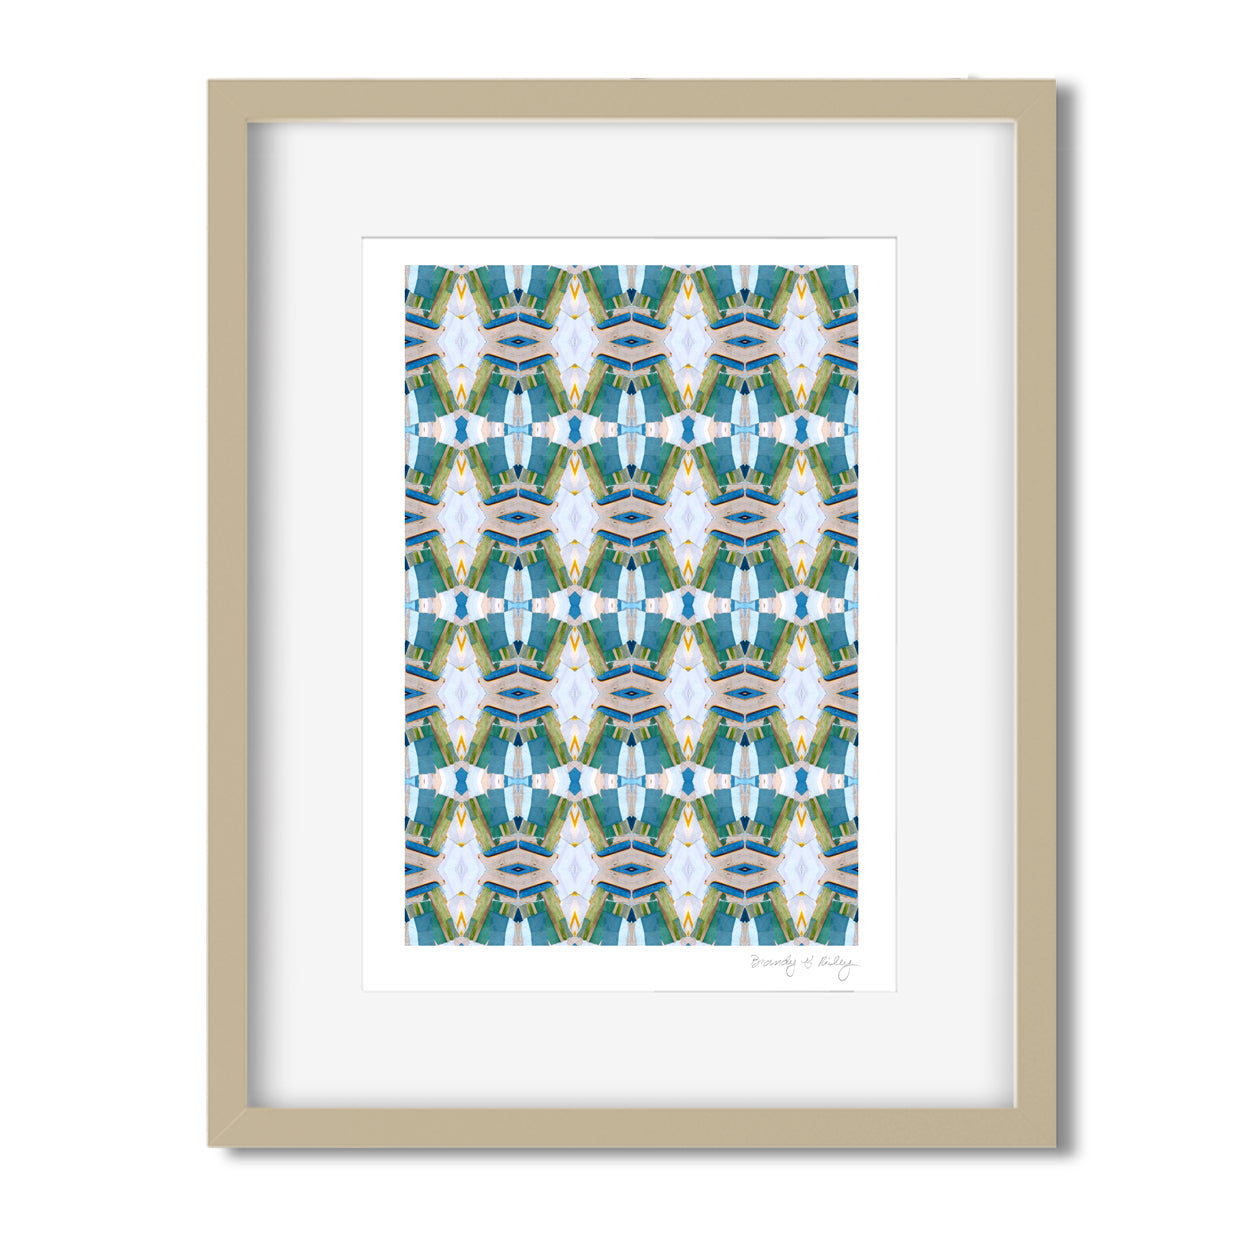 Framed 4x6 print featuring an abstract collaged pattern in turquoise.